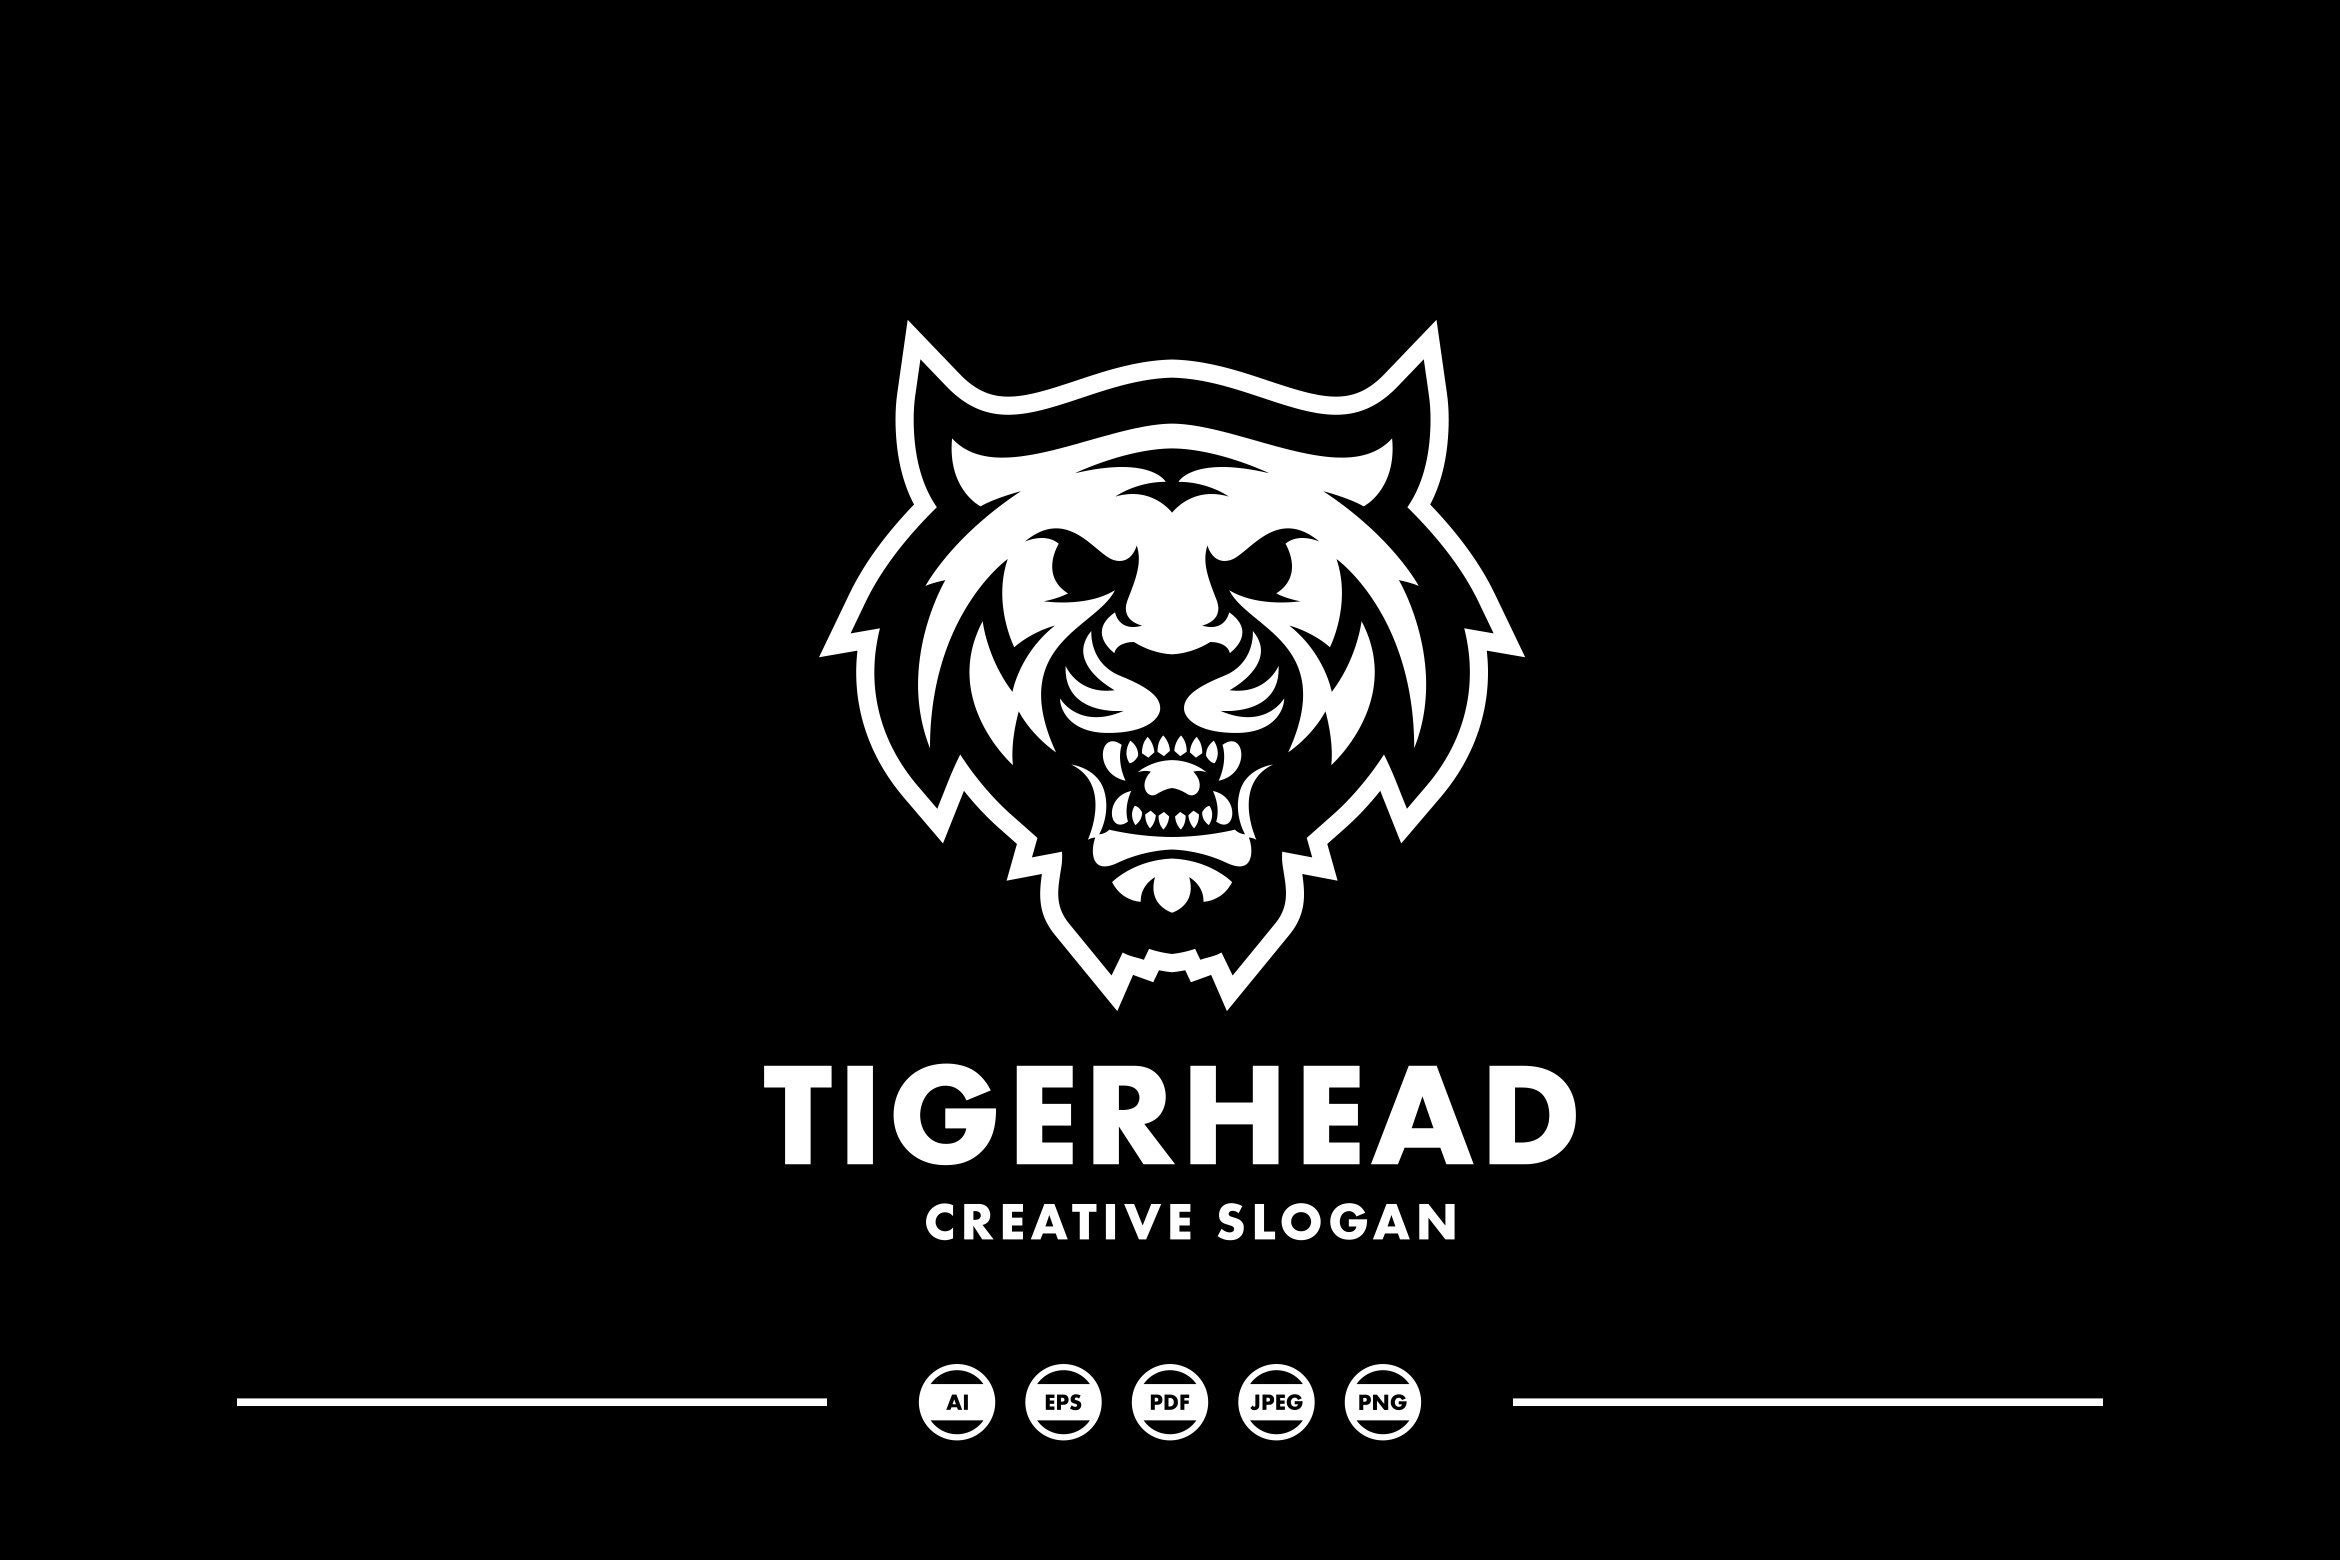 Awesome Tiger Head Silhouette Logo cover image.